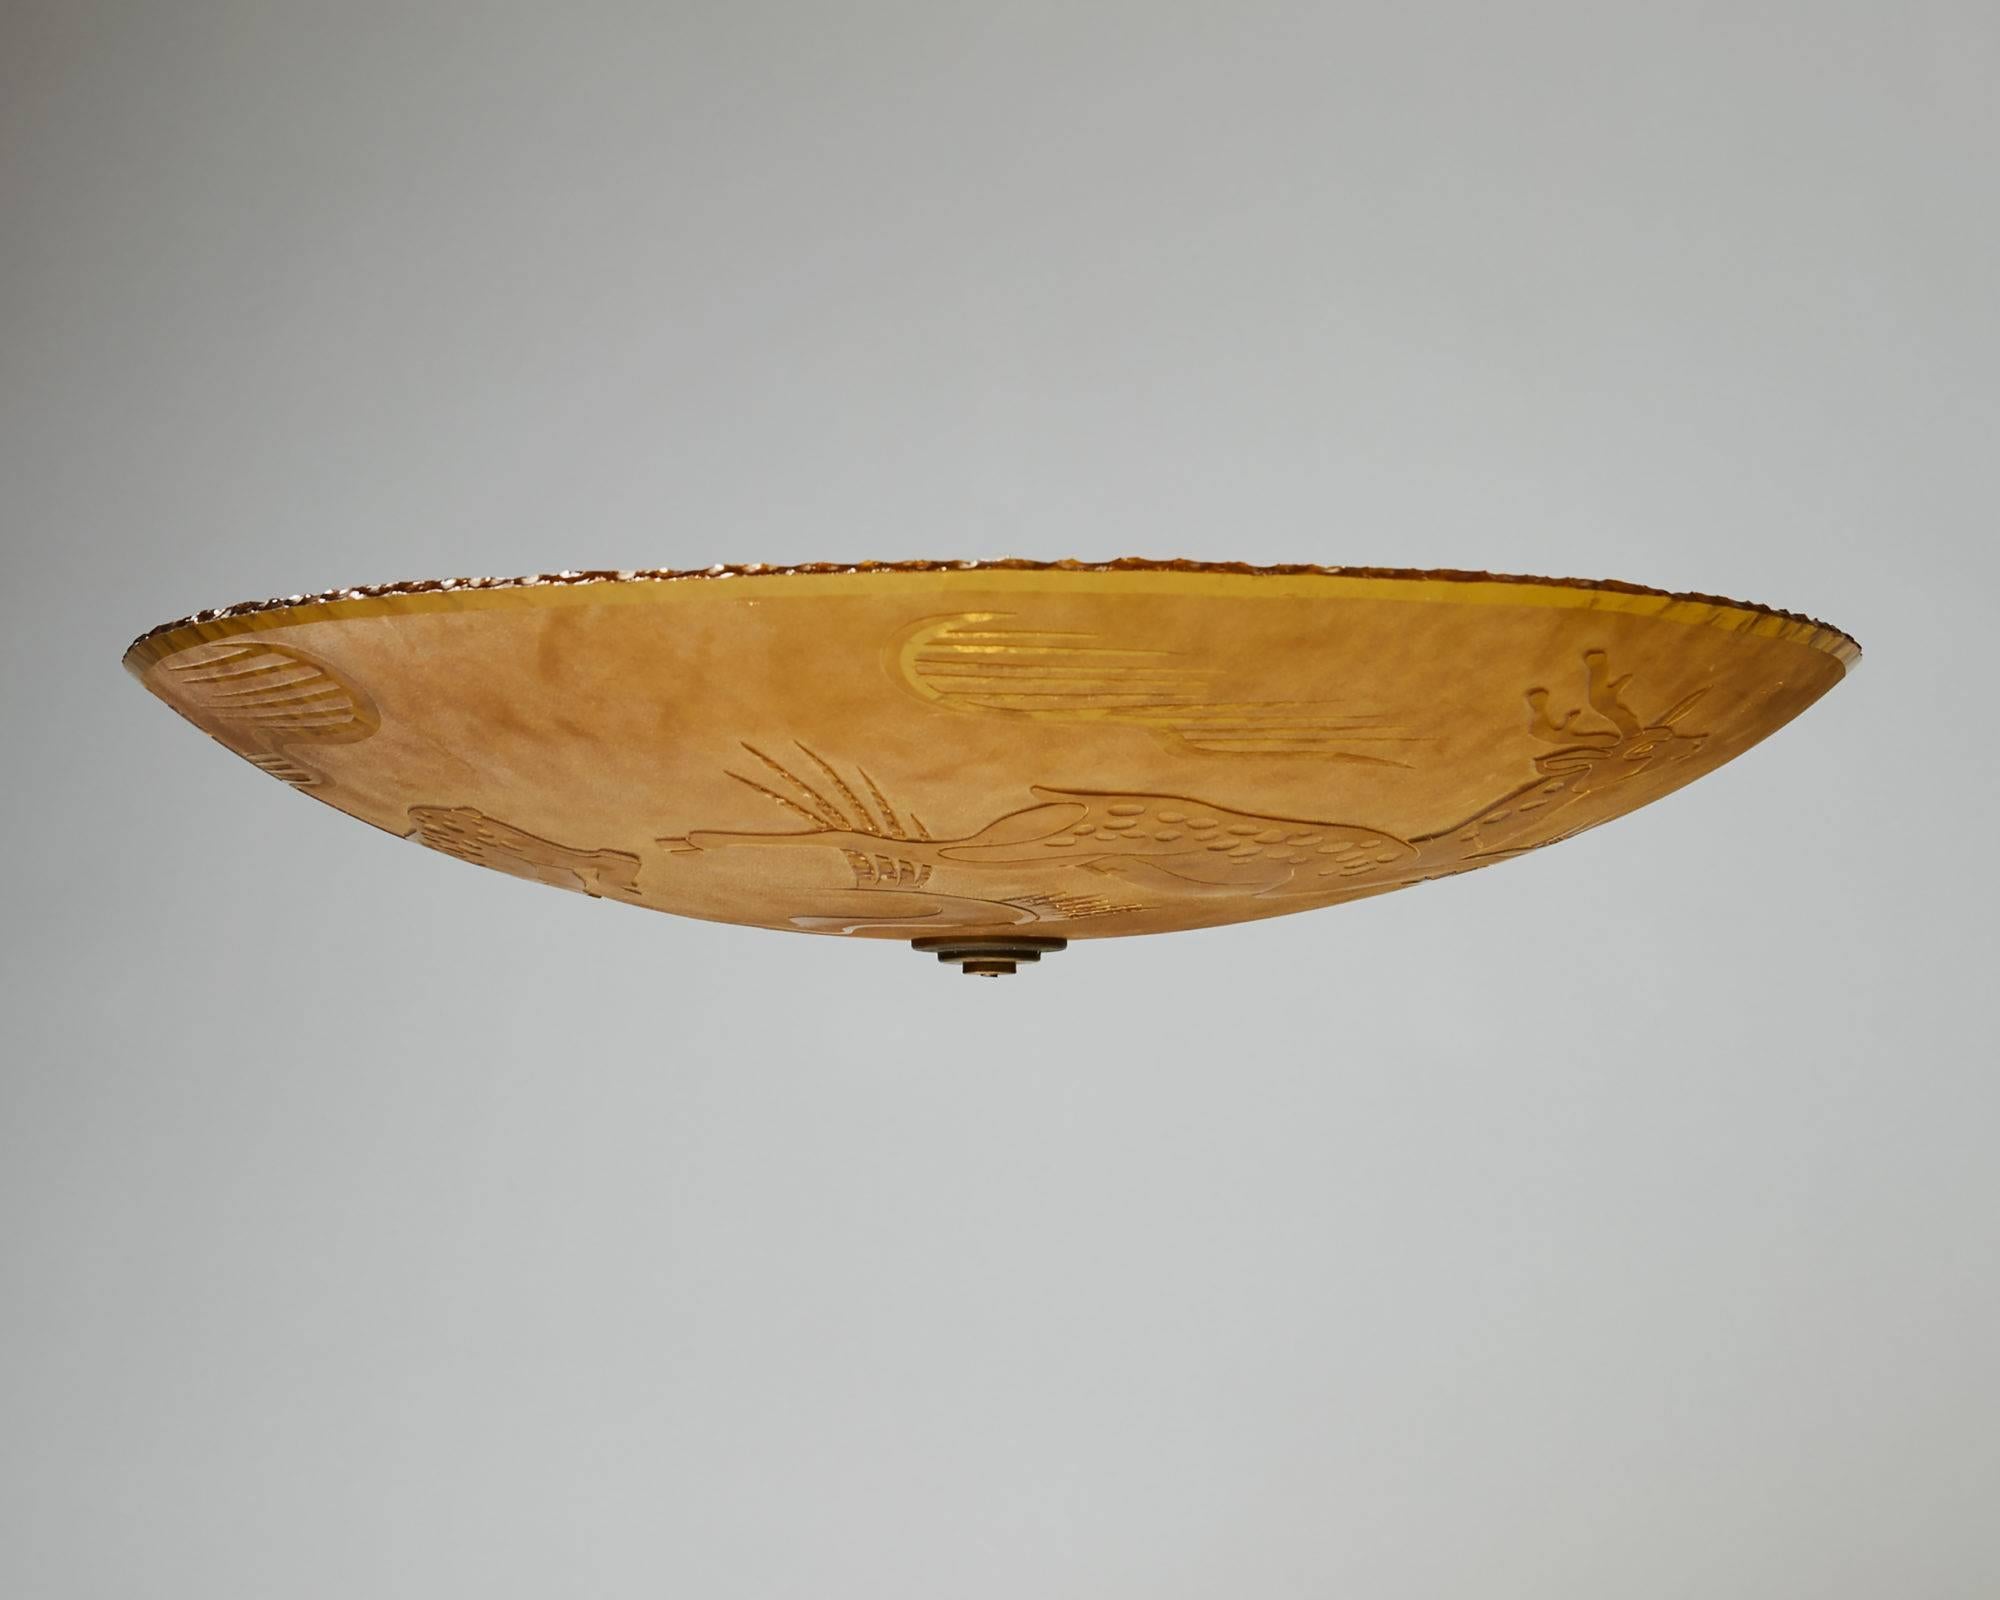 Ceiling lamp designed by Einar Forseth for Glössner, Sweden, 1940s. Etched glass and brass.

Measures: D 70 cm/ 27 1/2''
H 15 cm/ 6